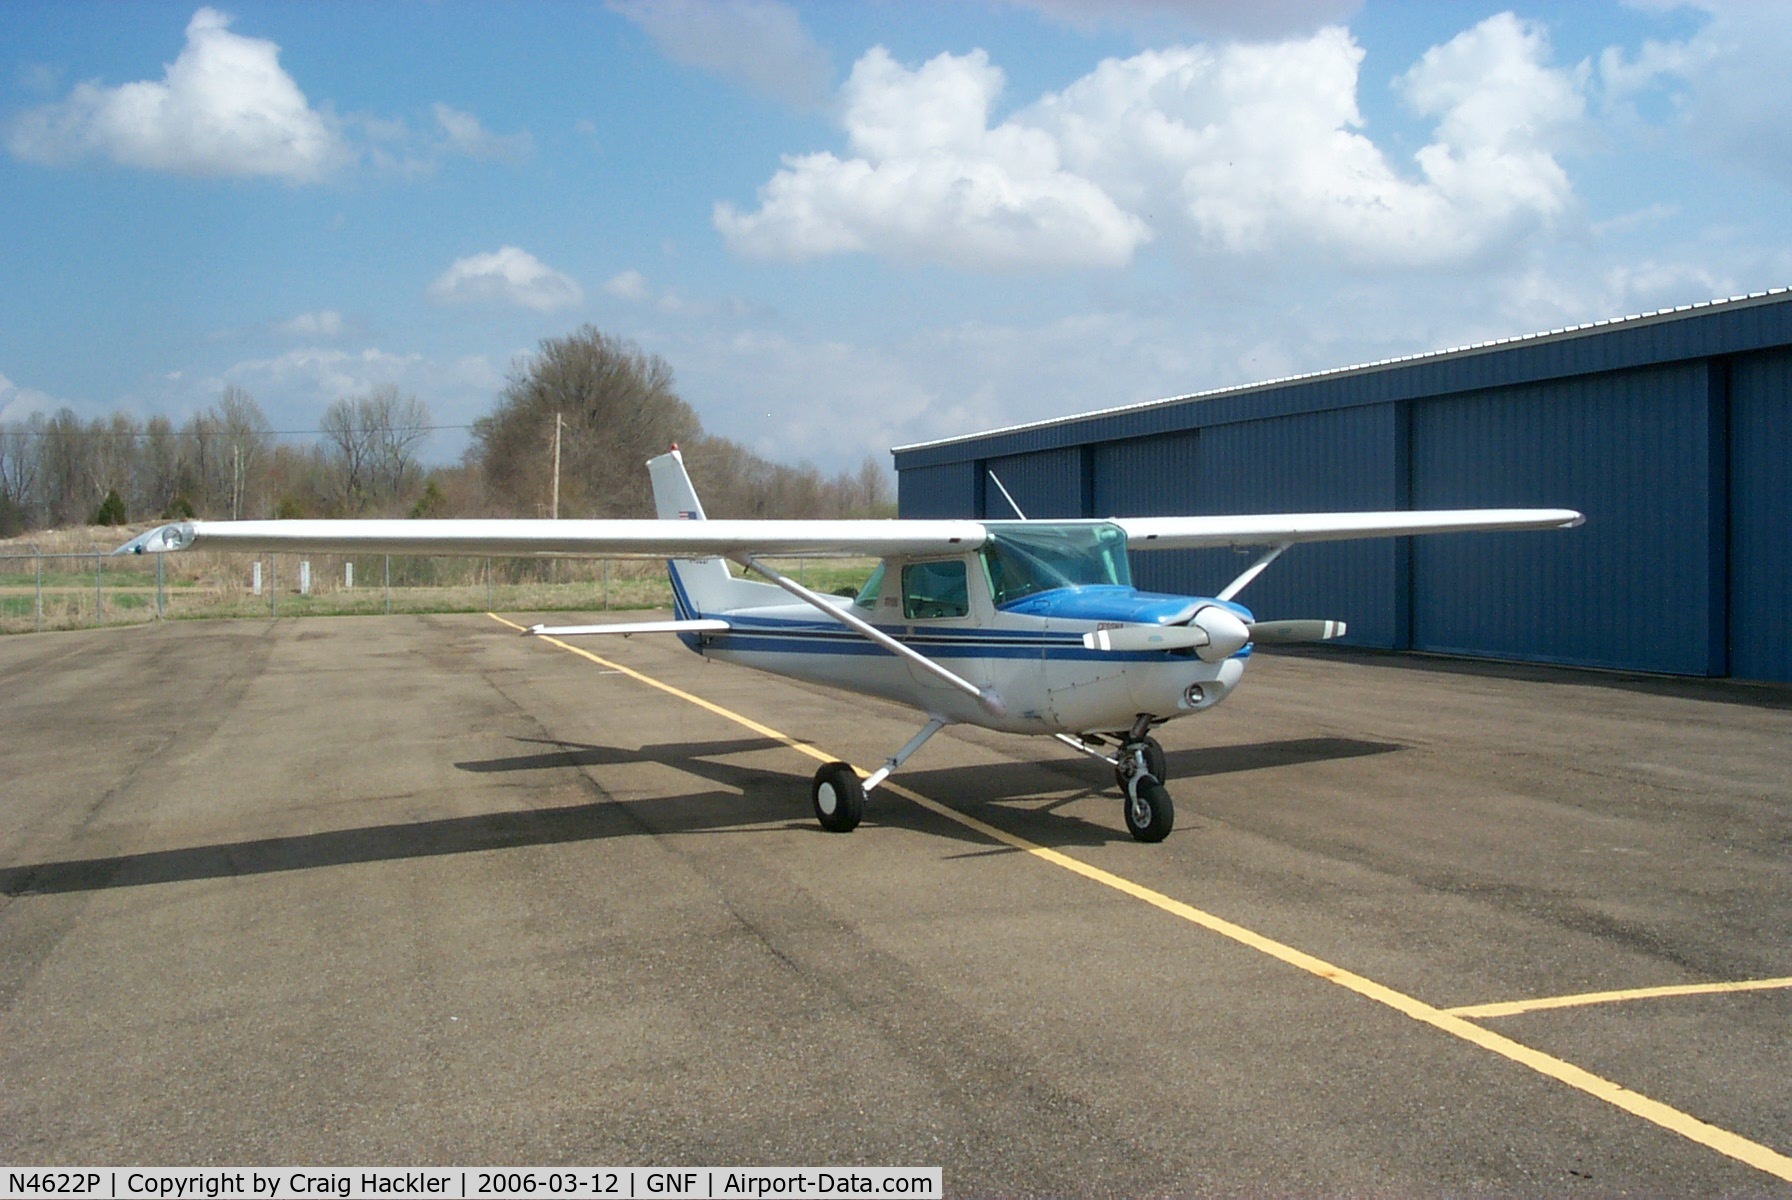 N4622P, 1980 Cessna 152 C/N 15284785, In front of the hangar at GNF